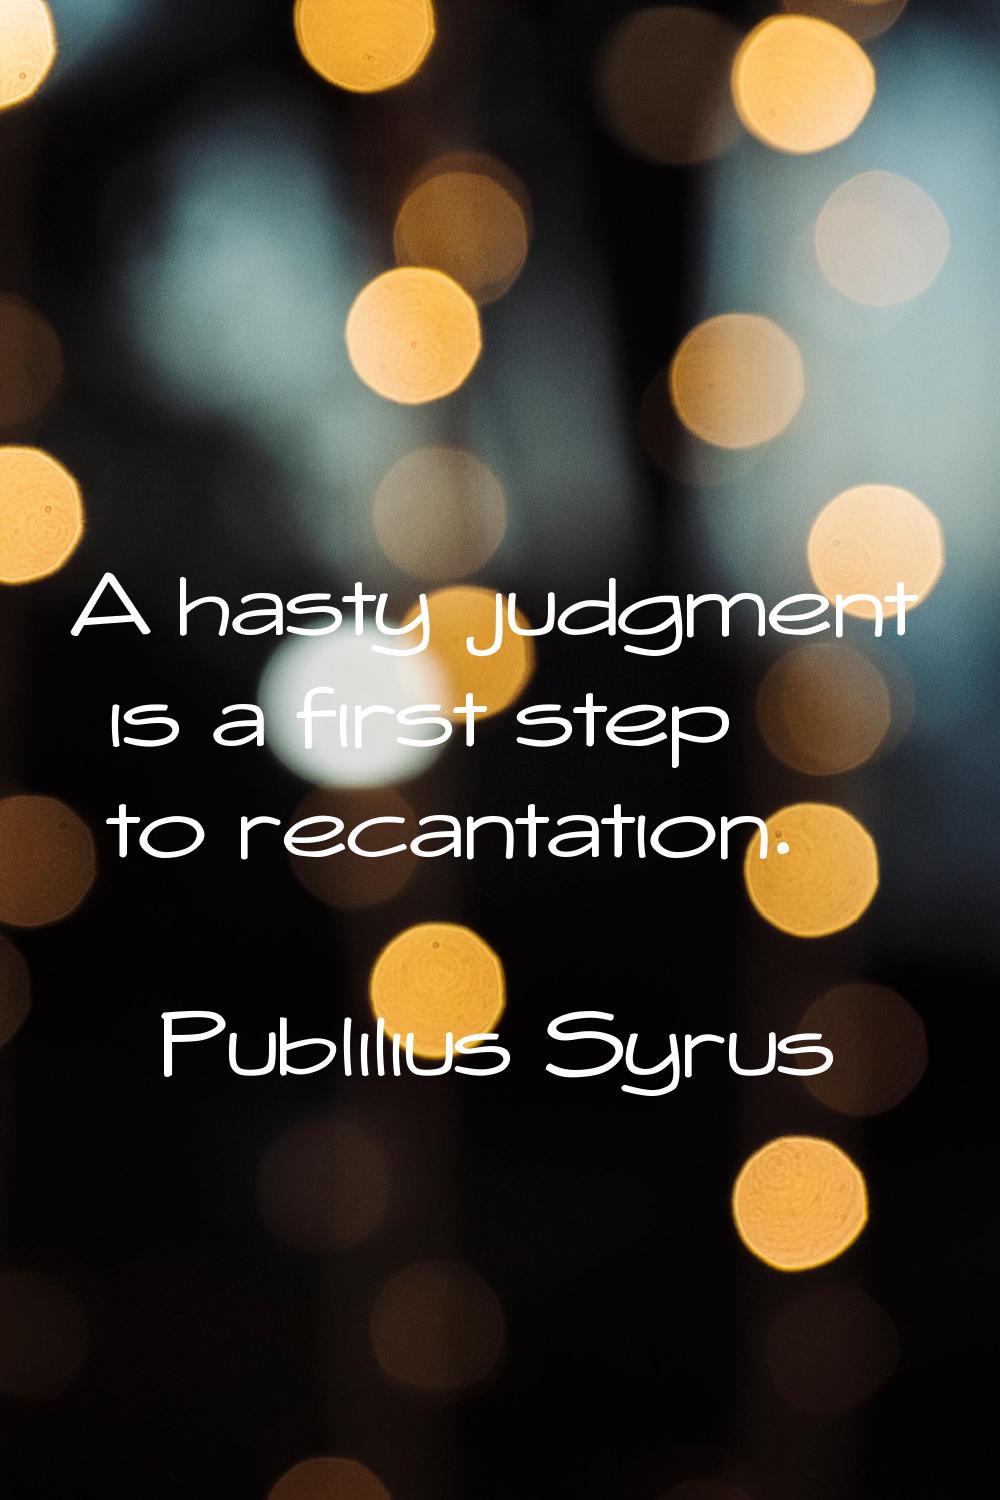 A hasty judgment is a first step to recantation.